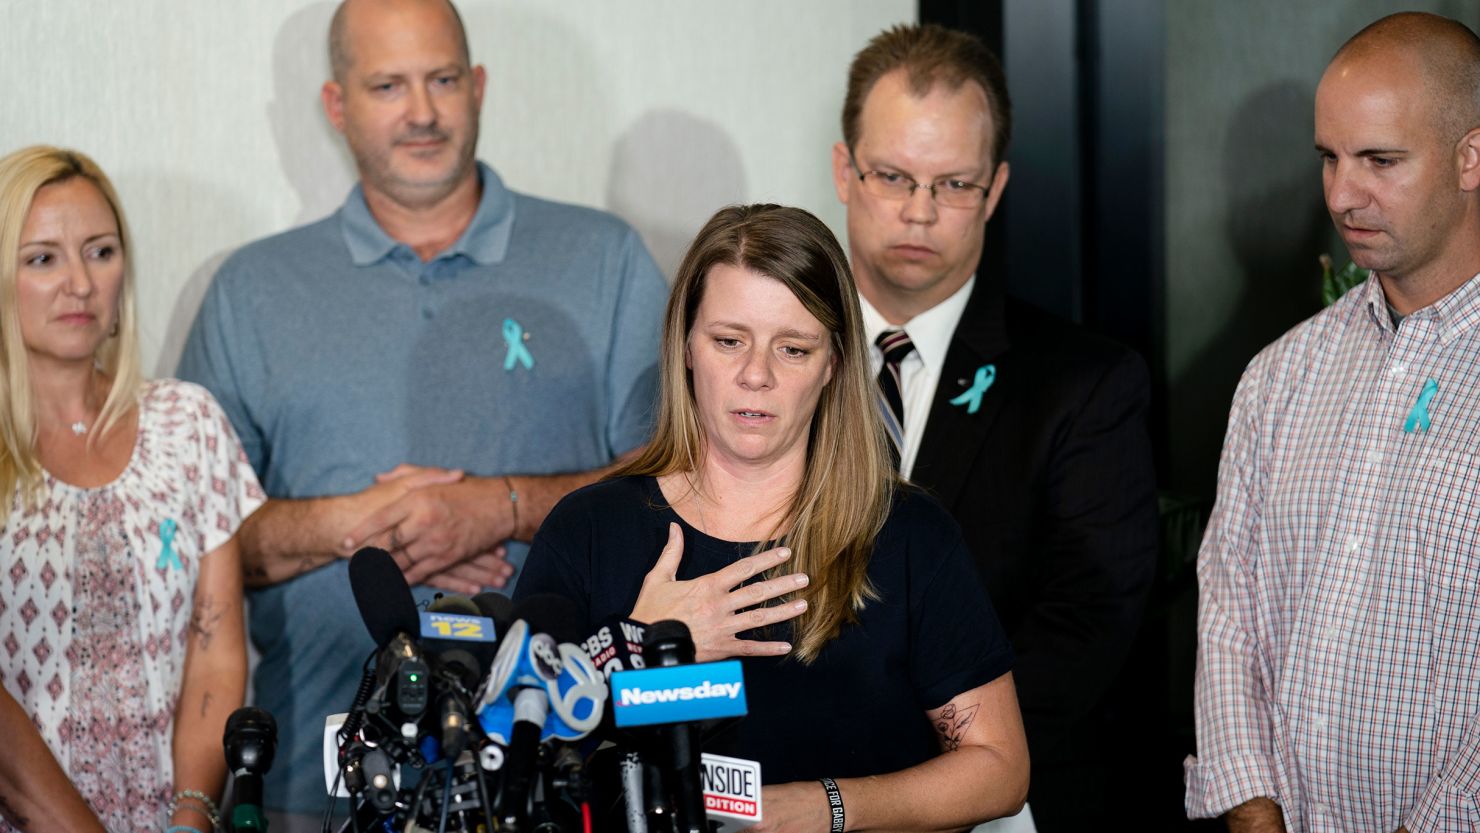 Nichole Schmidt, mother of Gabby Petito, whose death on a cross-country trip sparked a manhunt for her fiance Brian Laundrie, speaks alongside, from left, Tara Petito, stepmother, Joseph Petito, father, Richard Stafford, family attorney, and Jim Schmidt, stepfather, during a news conference in 2021. 